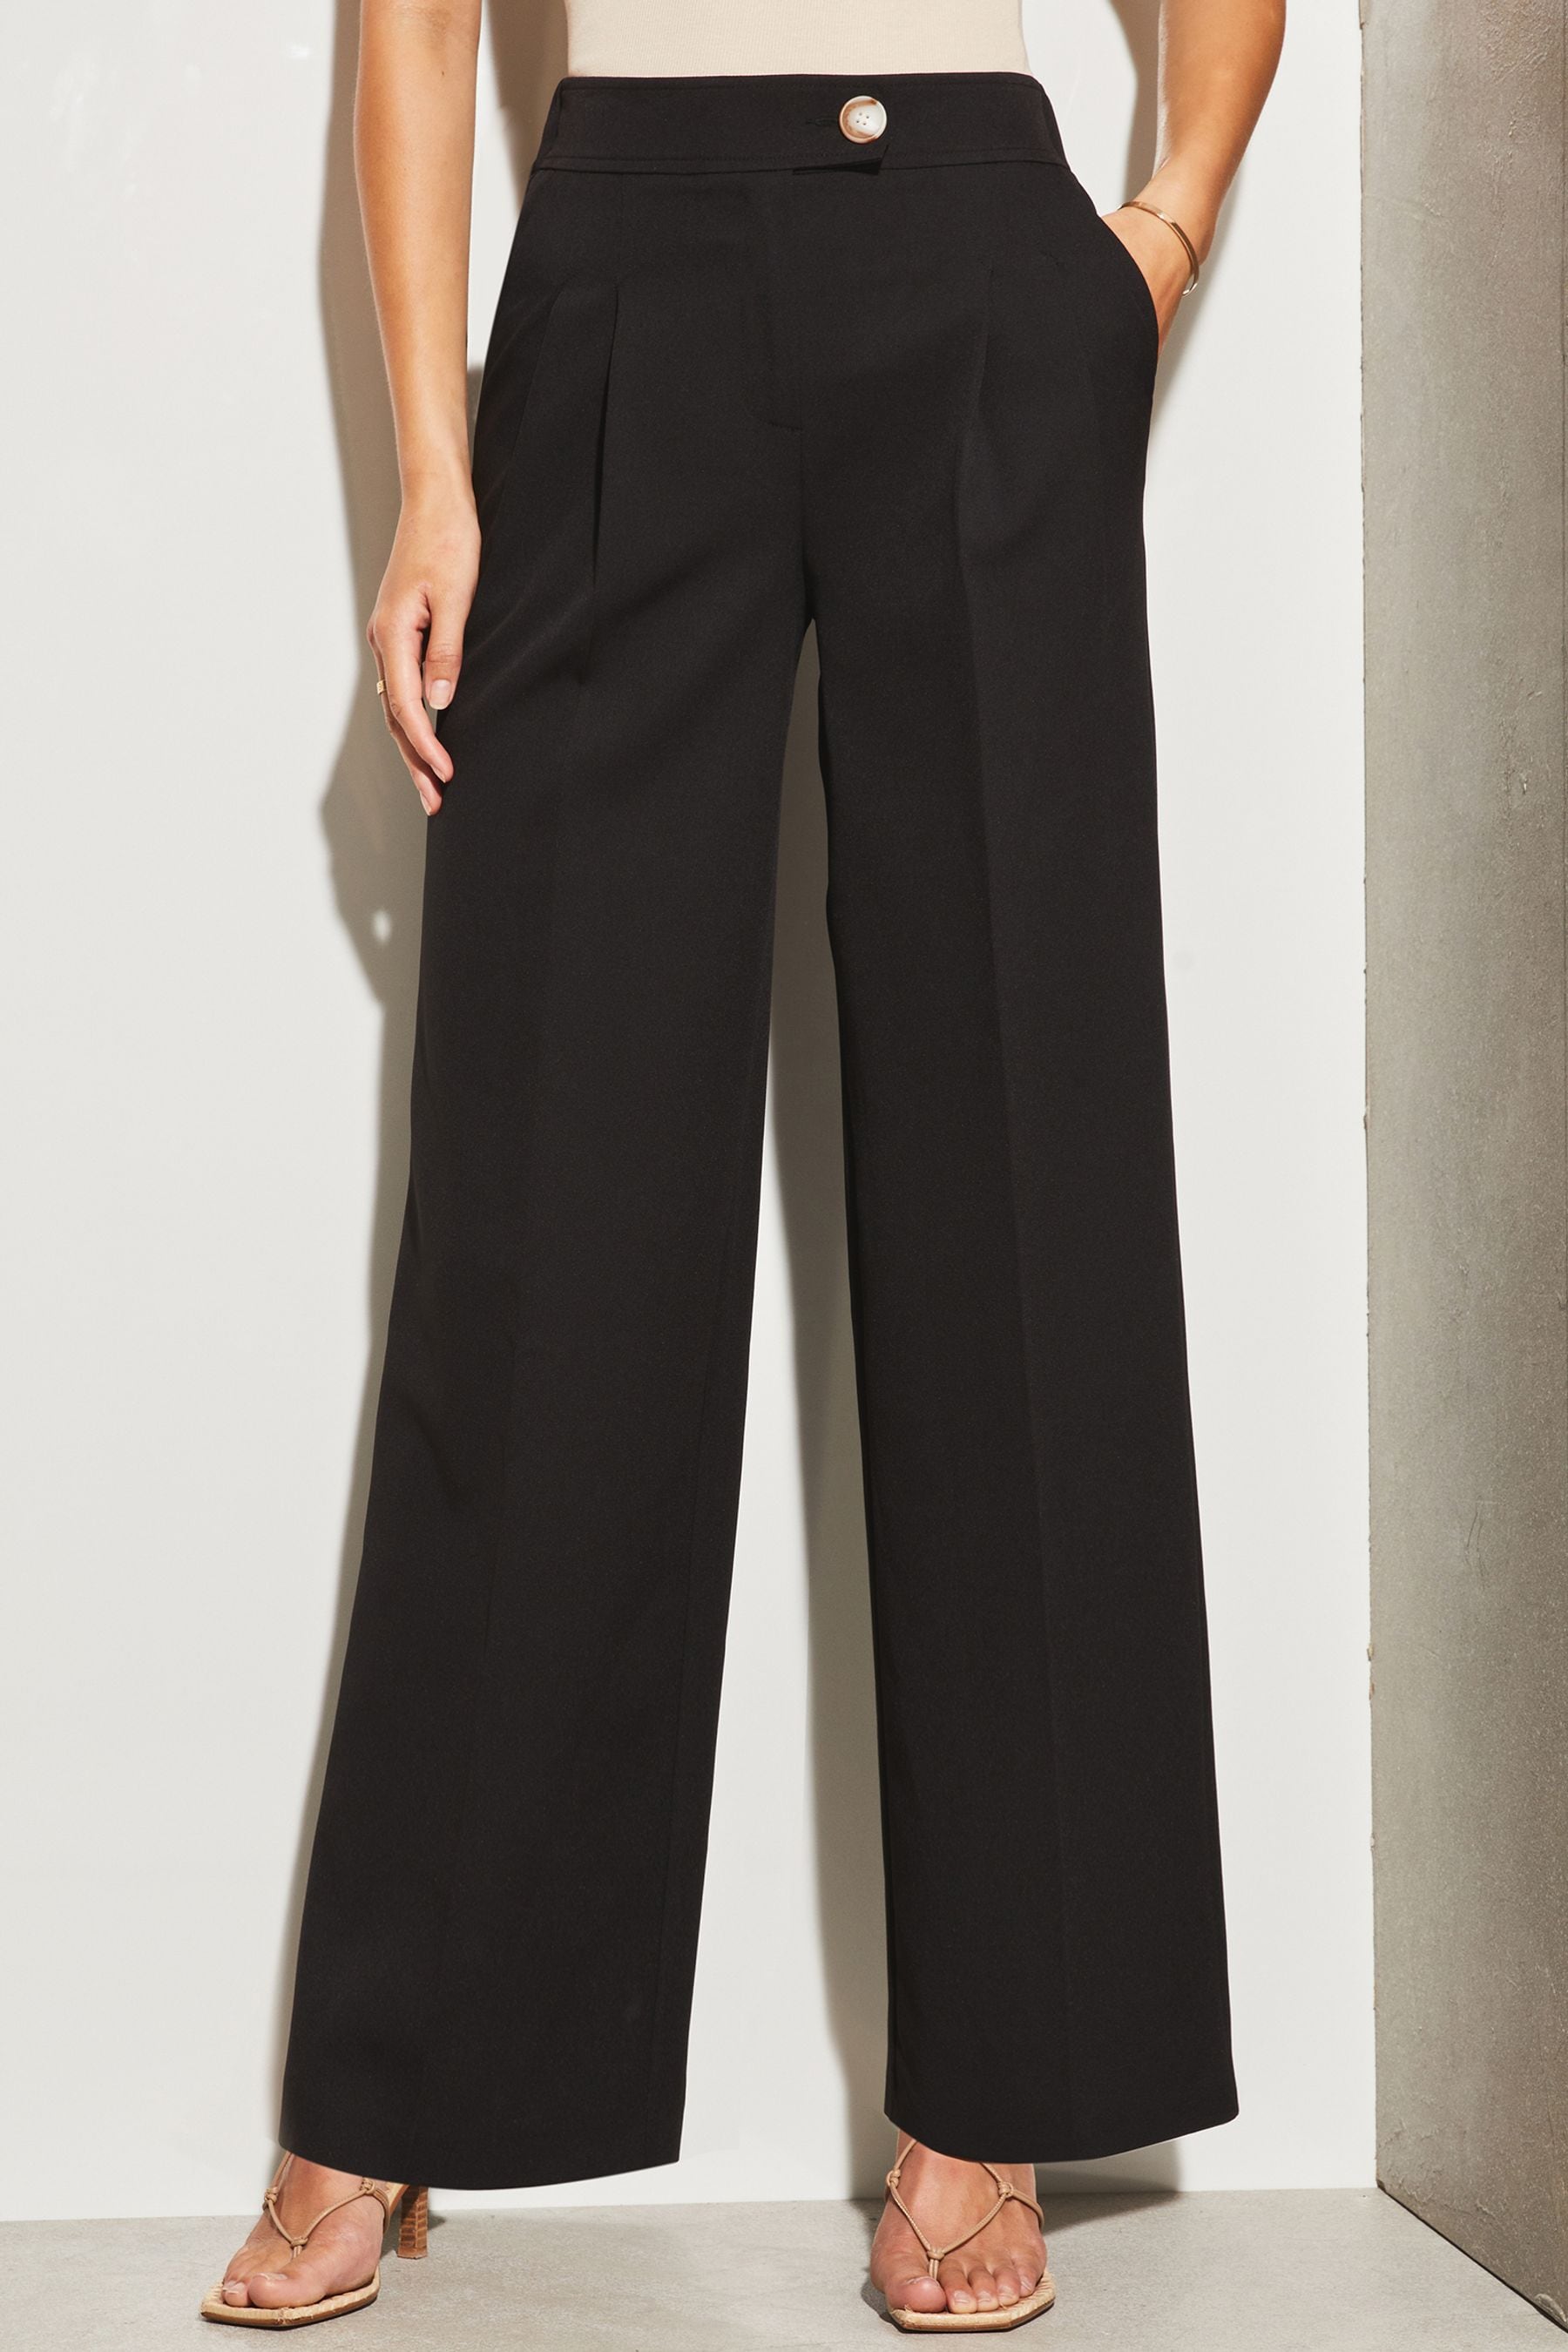 Buy Lipsy Relaxed Wide Leg Tailored Trousers from Next Ukraine